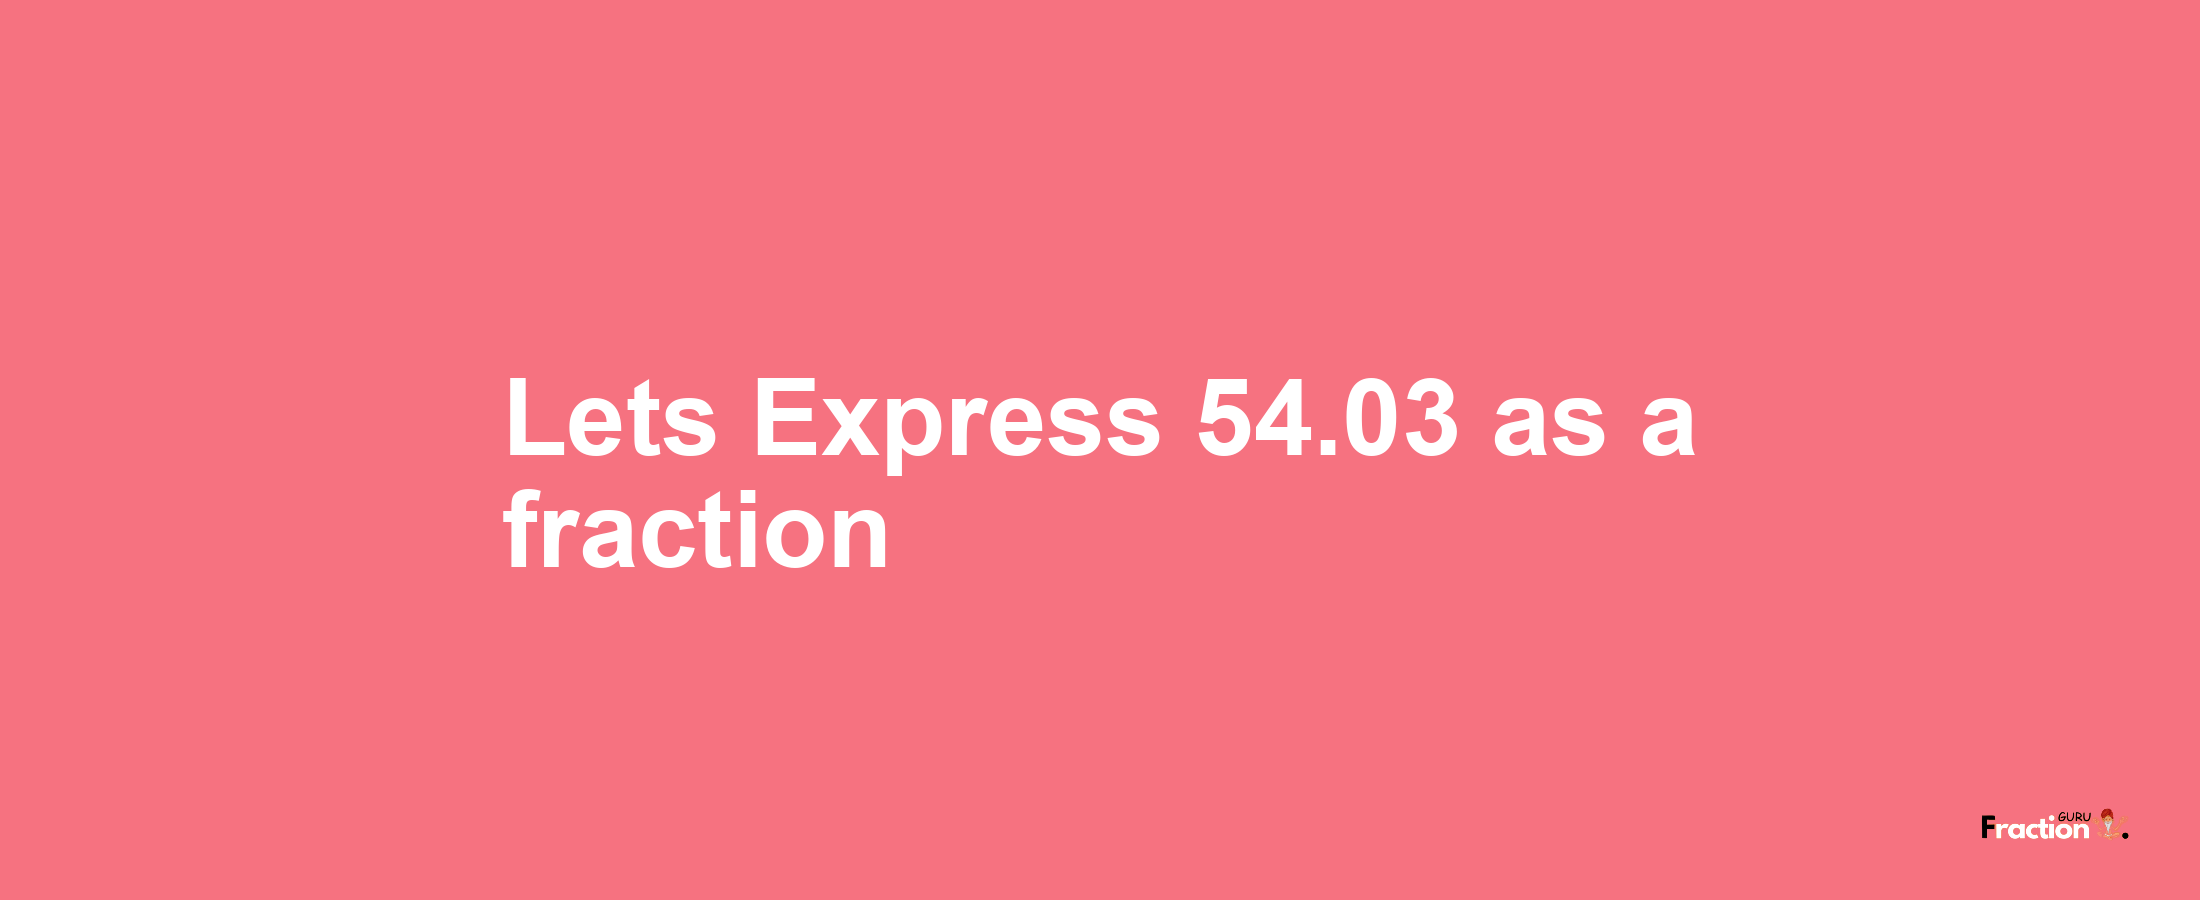 Lets Express 54.03 as afraction